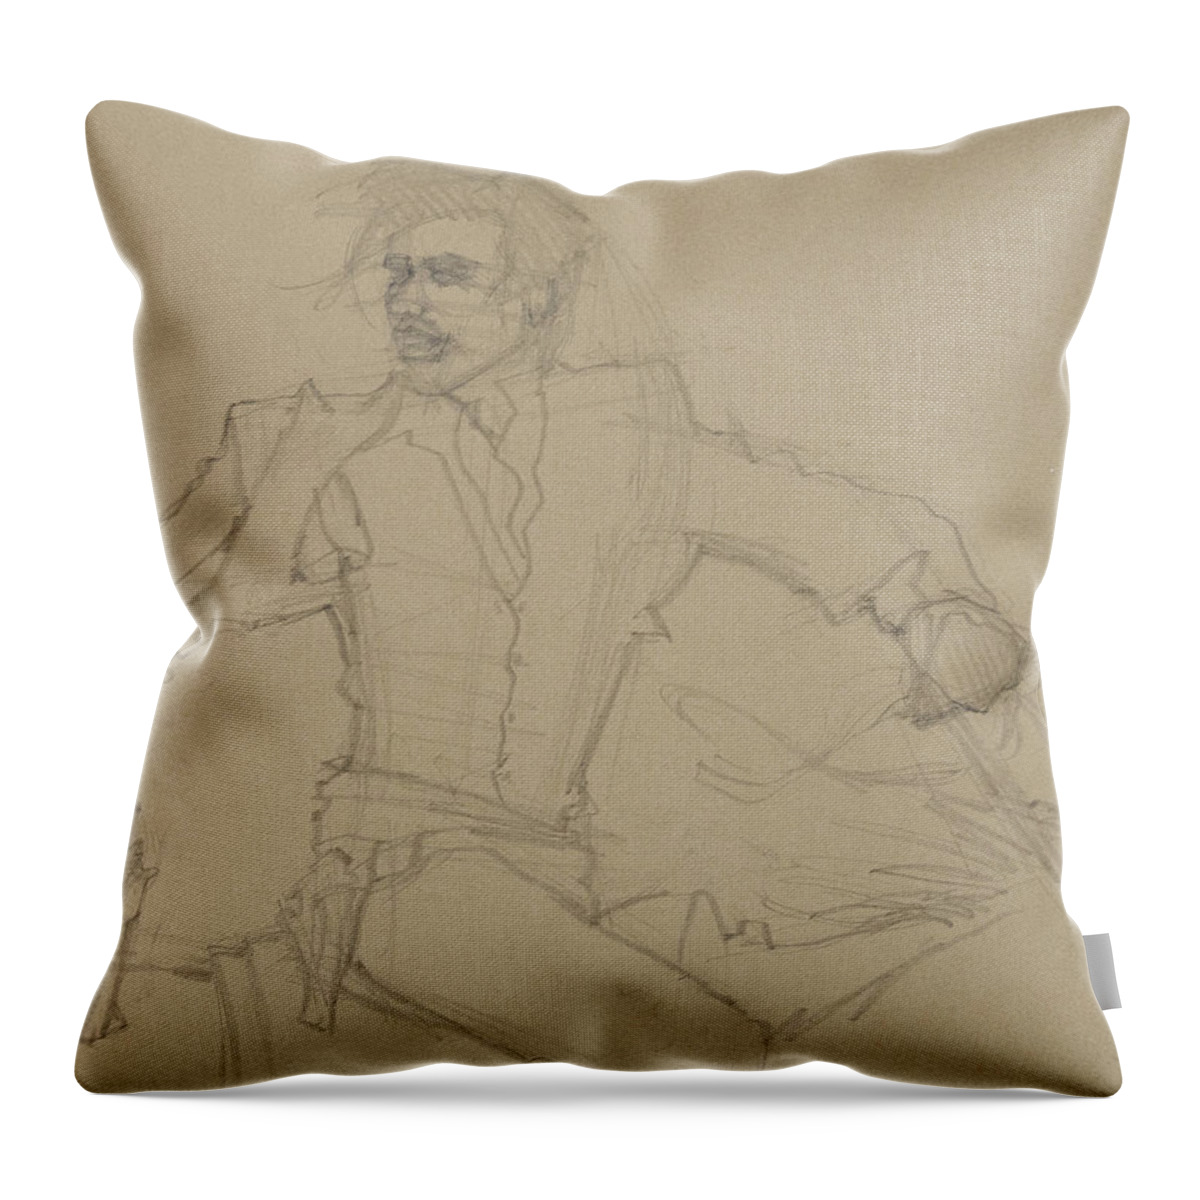 Horse And Rider Throw Pillow featuring the drawing Outlaw On The Run by Jani Freimann